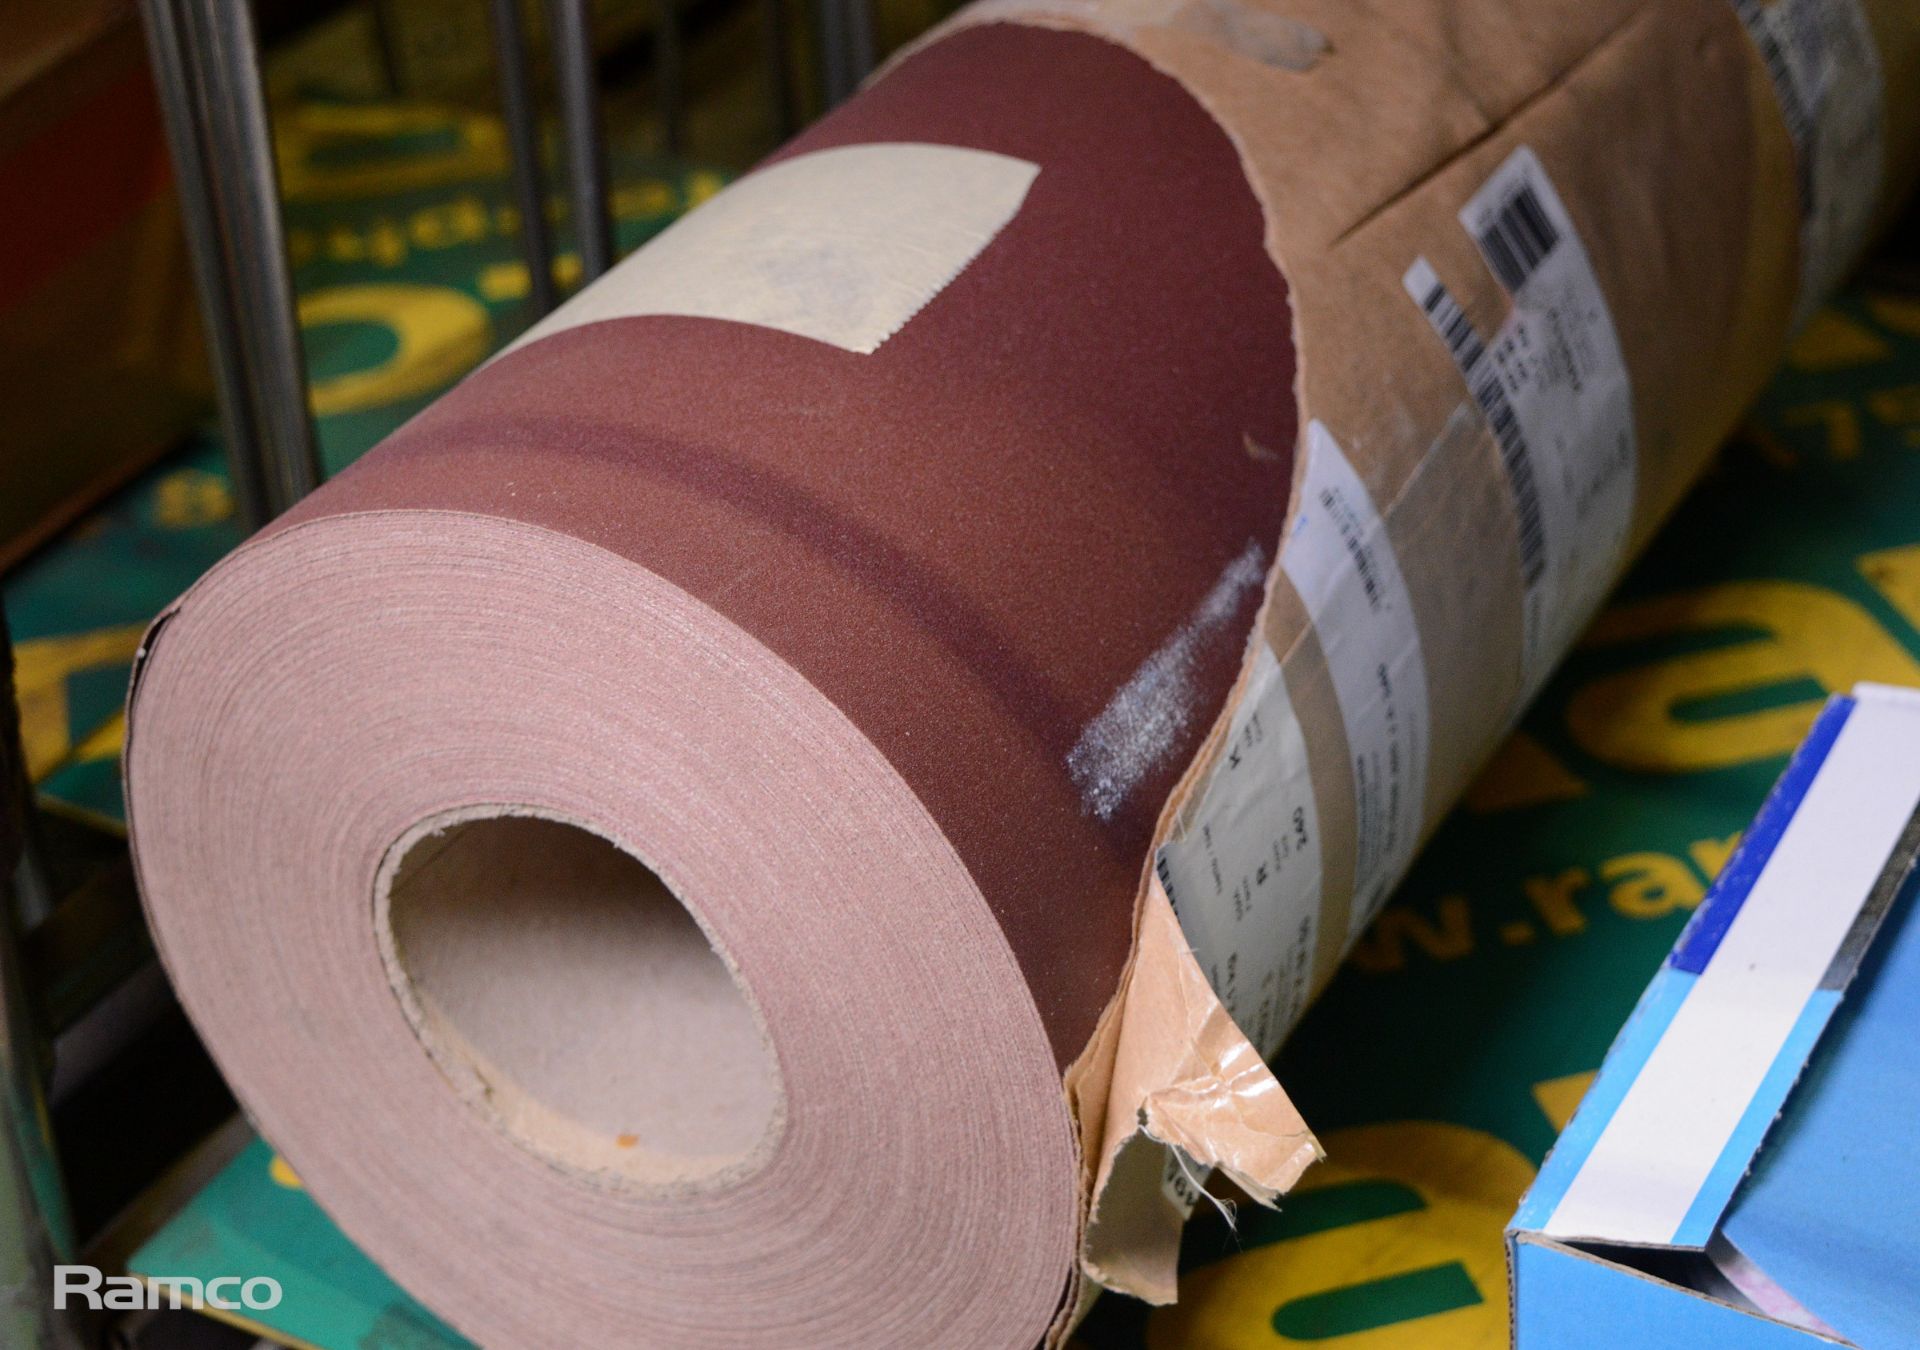 Abrasive discs, roll of abrasive paper - Image 2 of 5